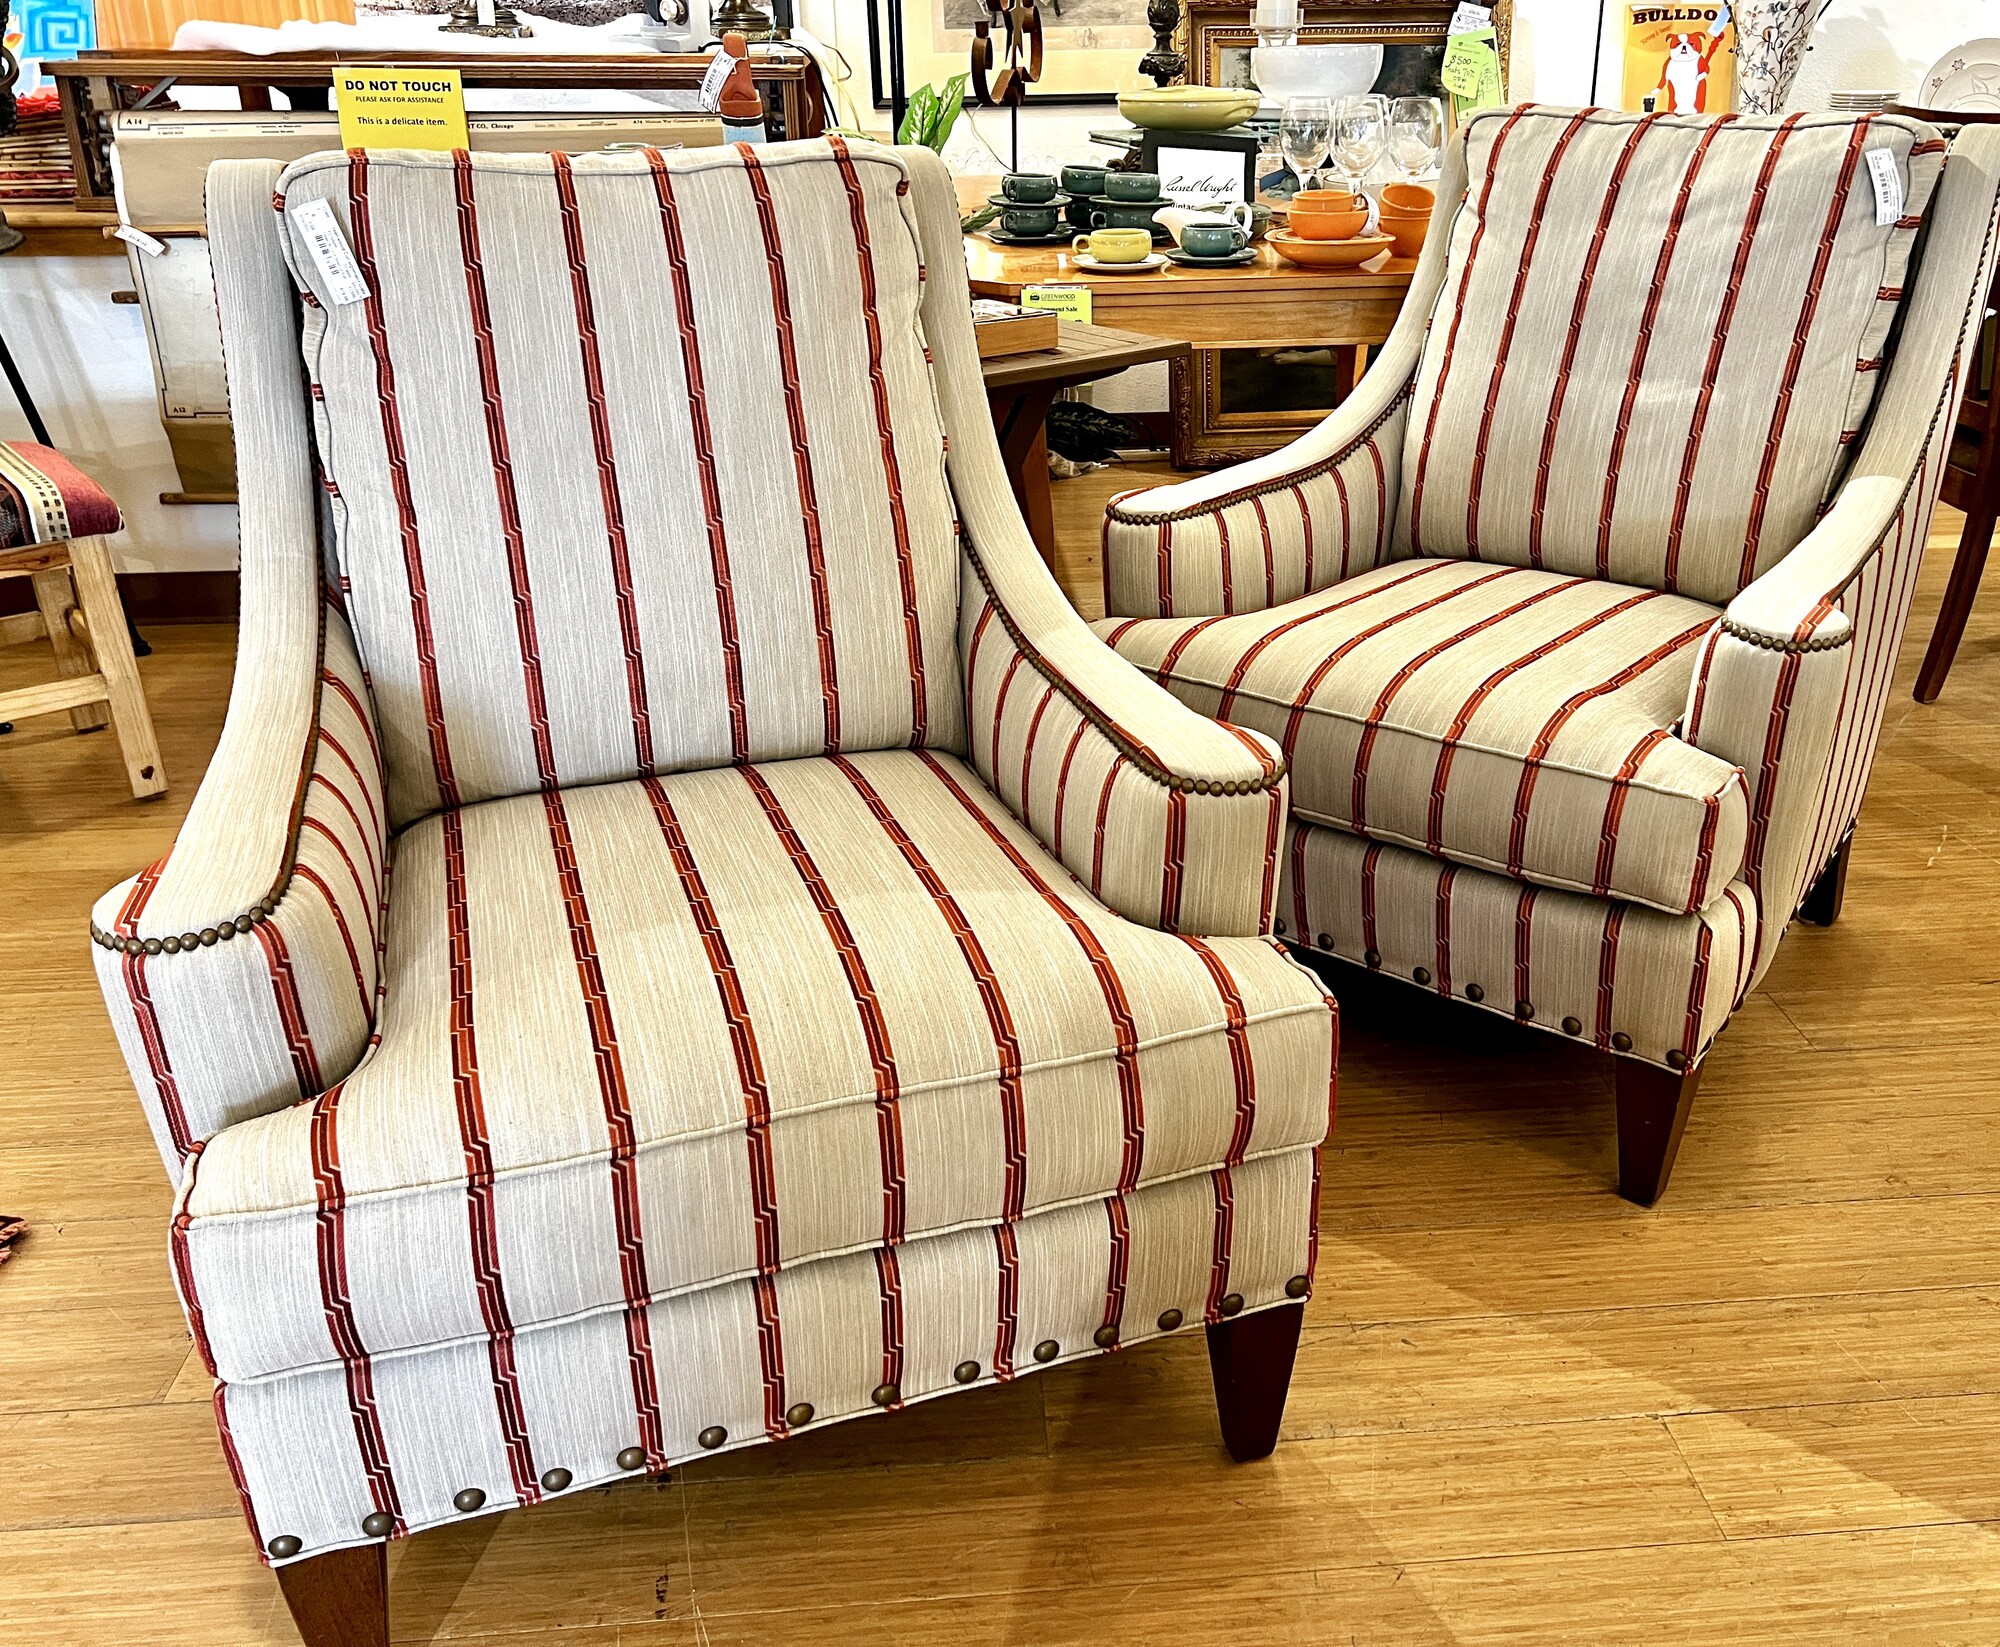 ChairSherrill Furniture, Striped,
Size: 34x34x39

Second one available item #12380